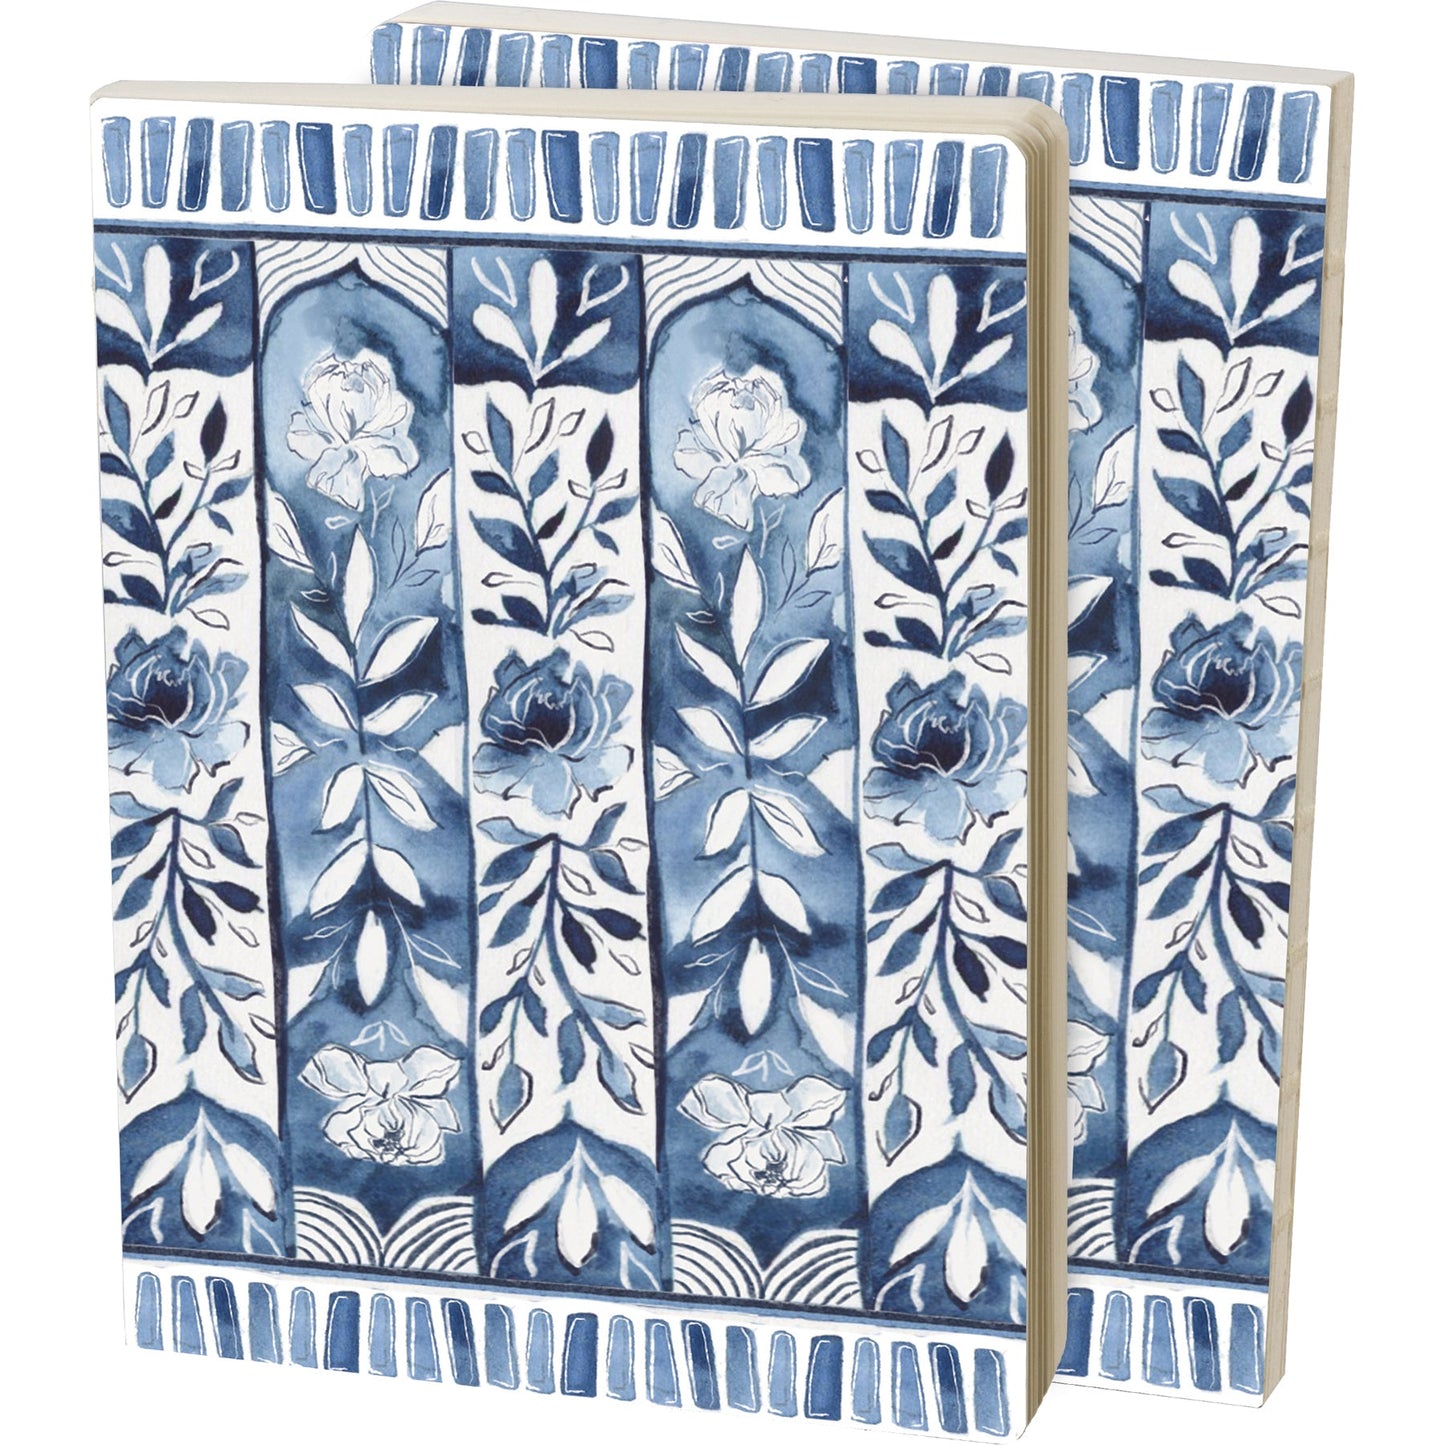 Blue and White Florals Journal | Double-Sided Notebook | 160 Lined Pages